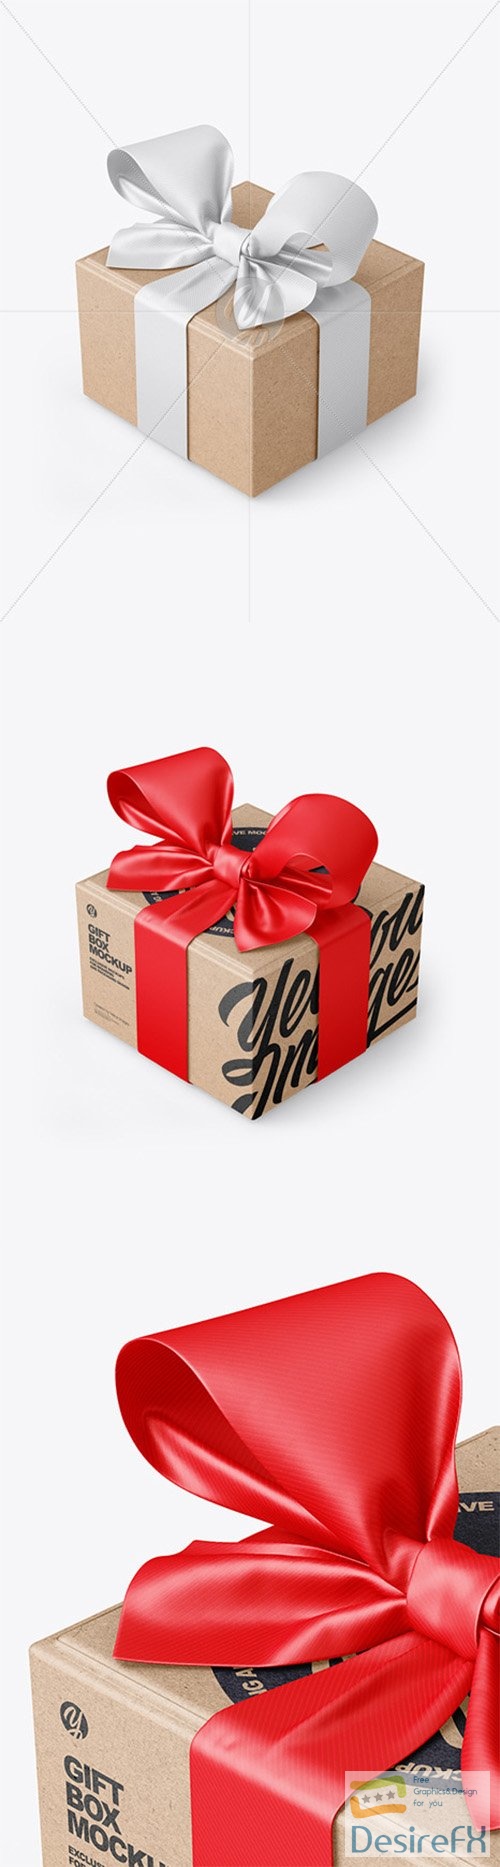 Kraft Paper Gift Box With Tied Bow Mockup 79780 TIF